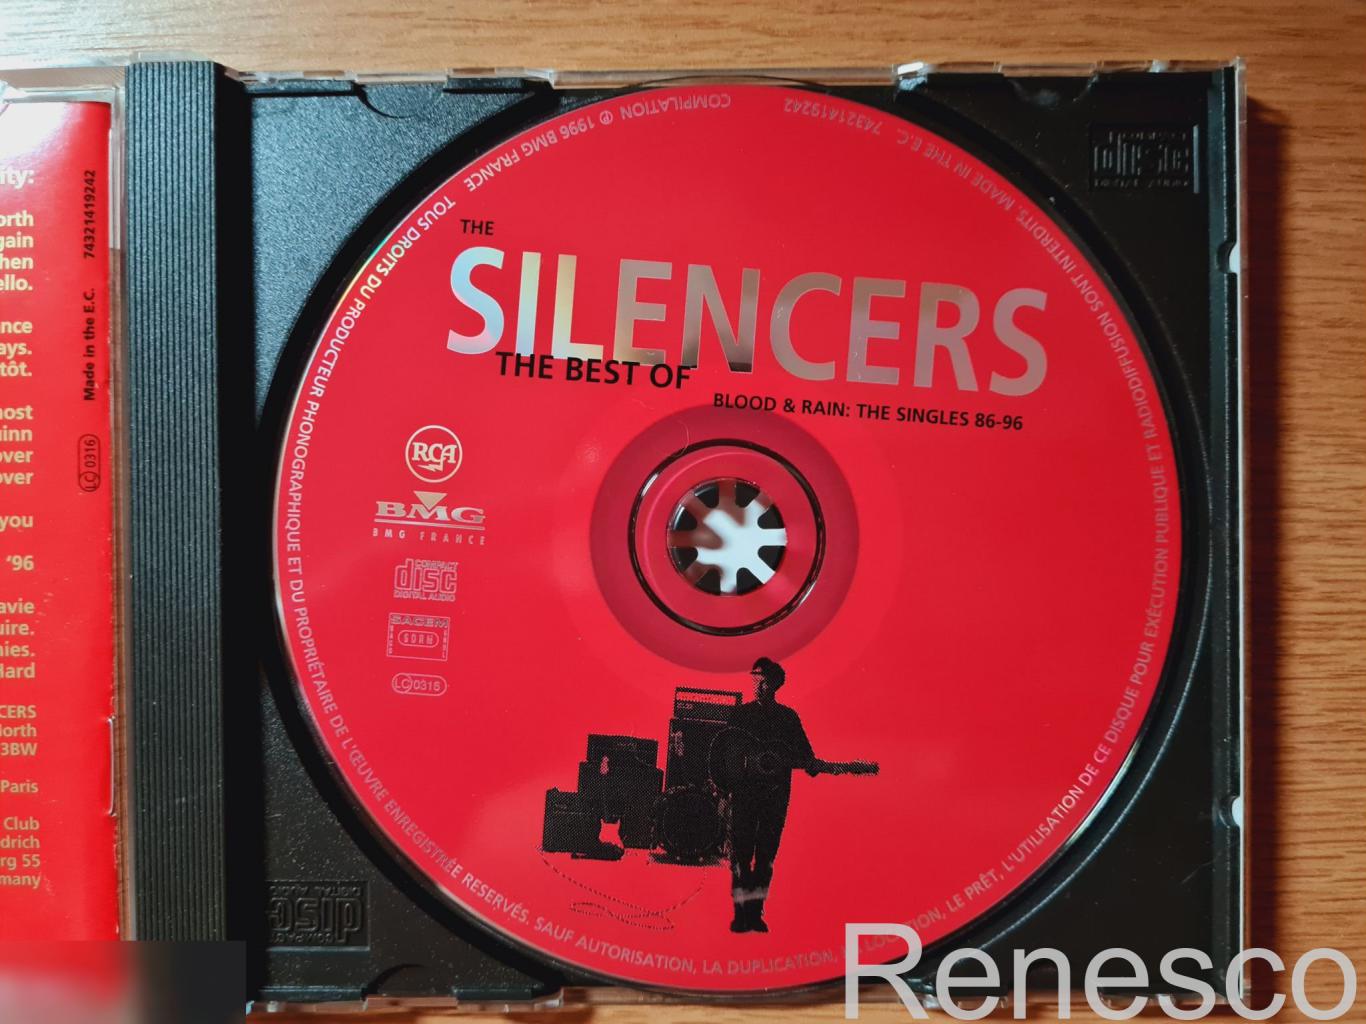 The Silencers ?– Blood & Rain: The Singles 86-96 - The Best Of (Europe) (1996) 4